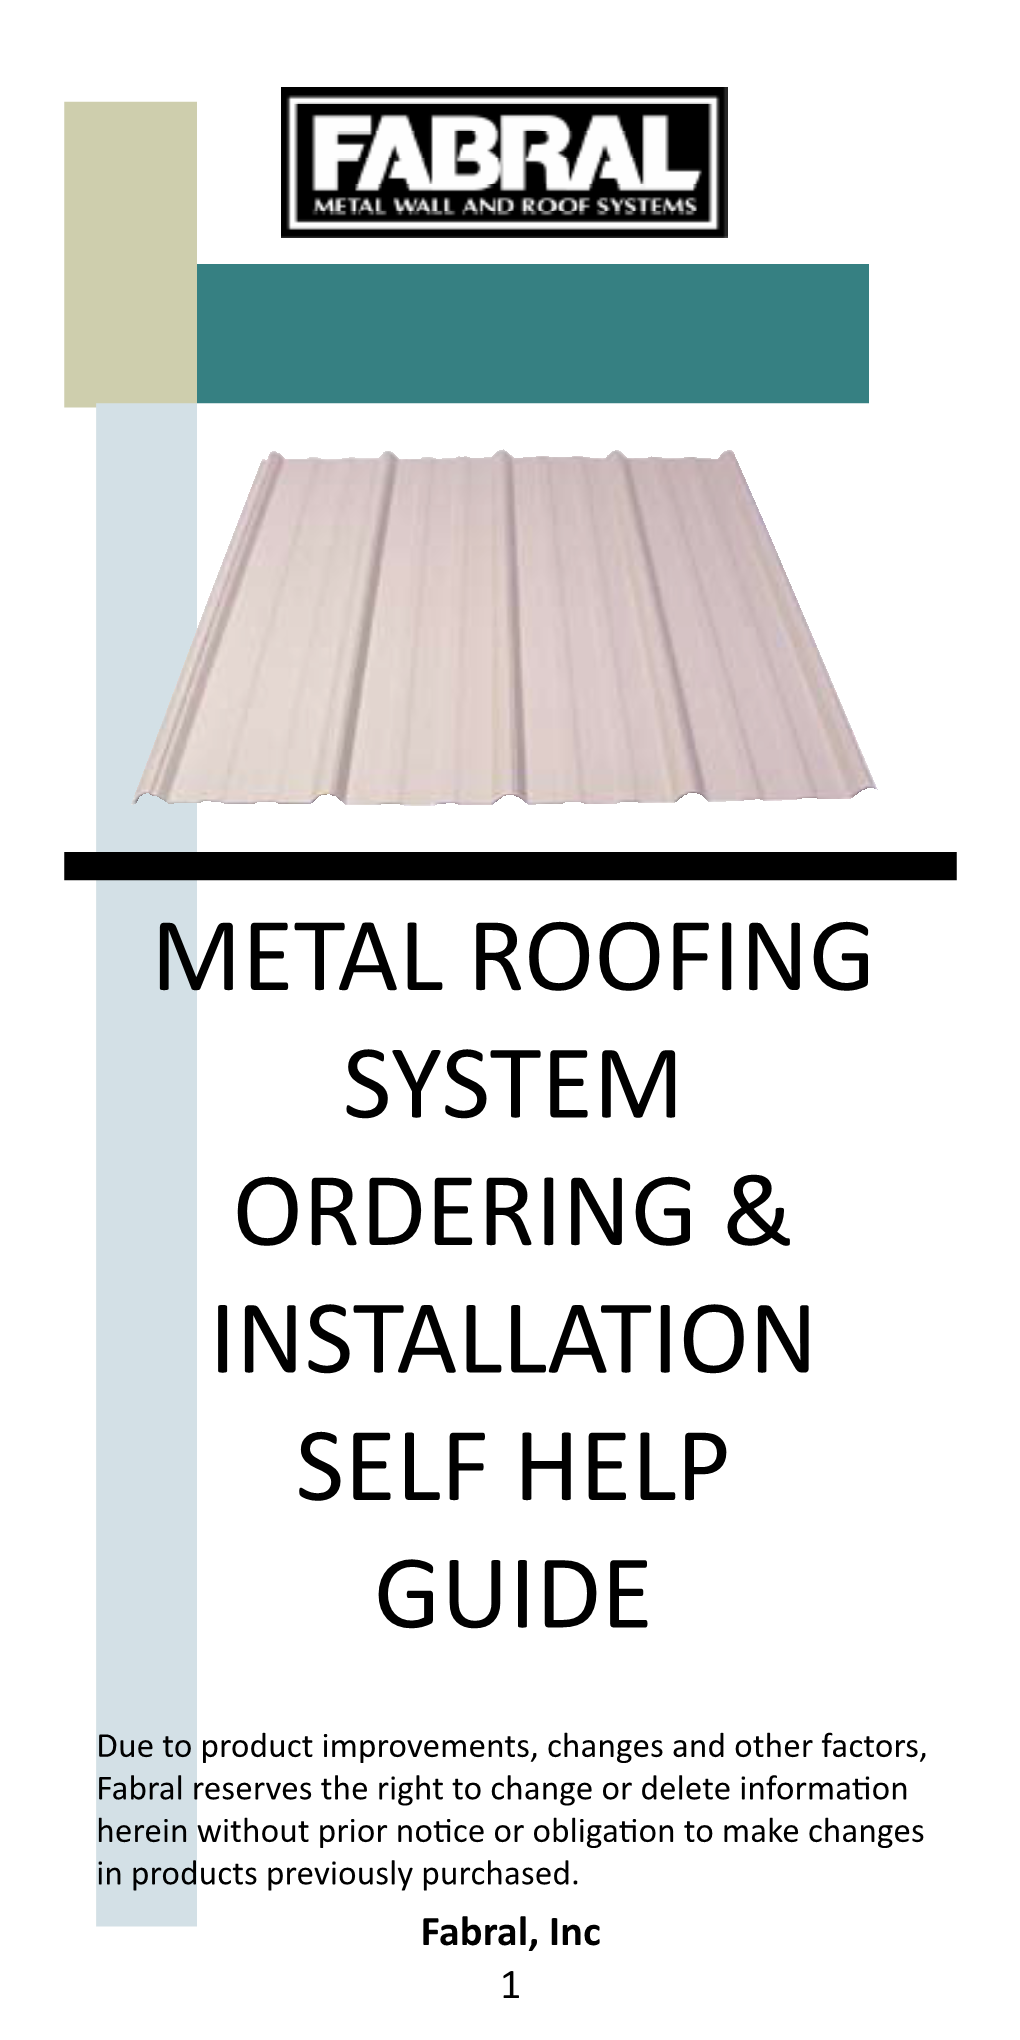 Metal Roofing System Ordering & Installation Self Help Guide